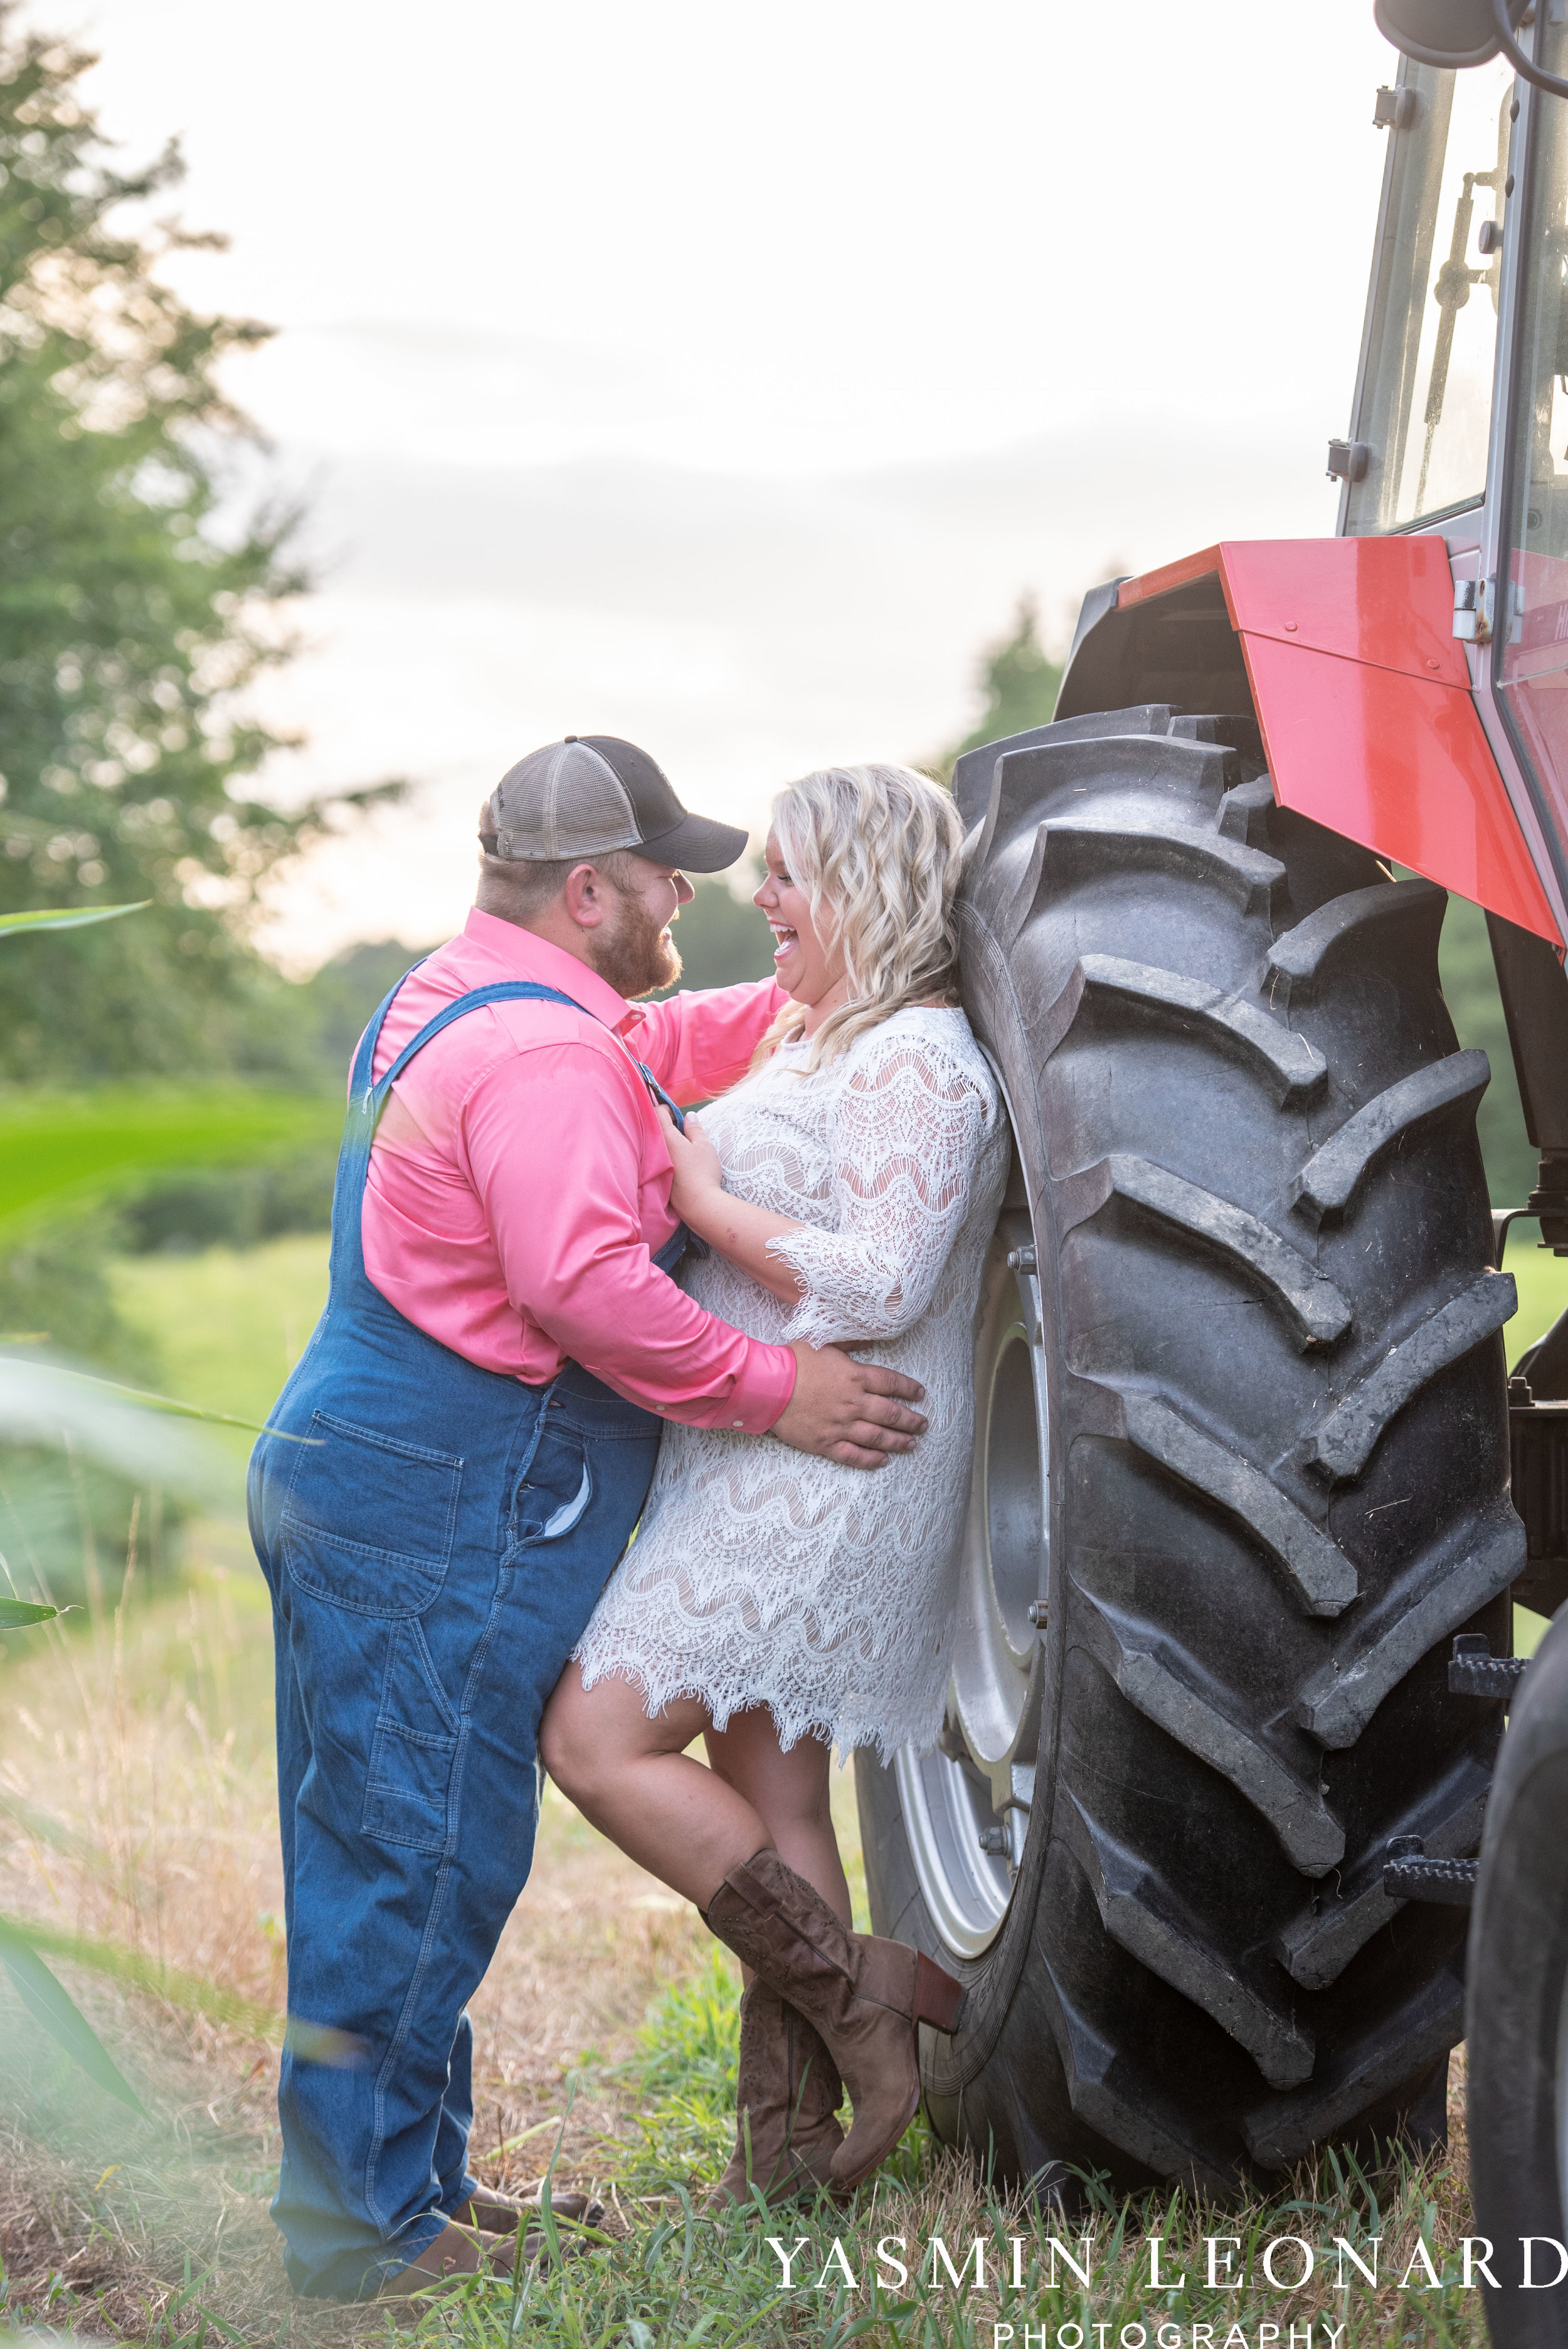 NC Engaged - Wallburg Engagement - Country Engagement Session - Barn Engagement Session - Outdoor Engagement Session - Farmer Engagement Session - Engagement Session with Overalls and Boots-15.jpg